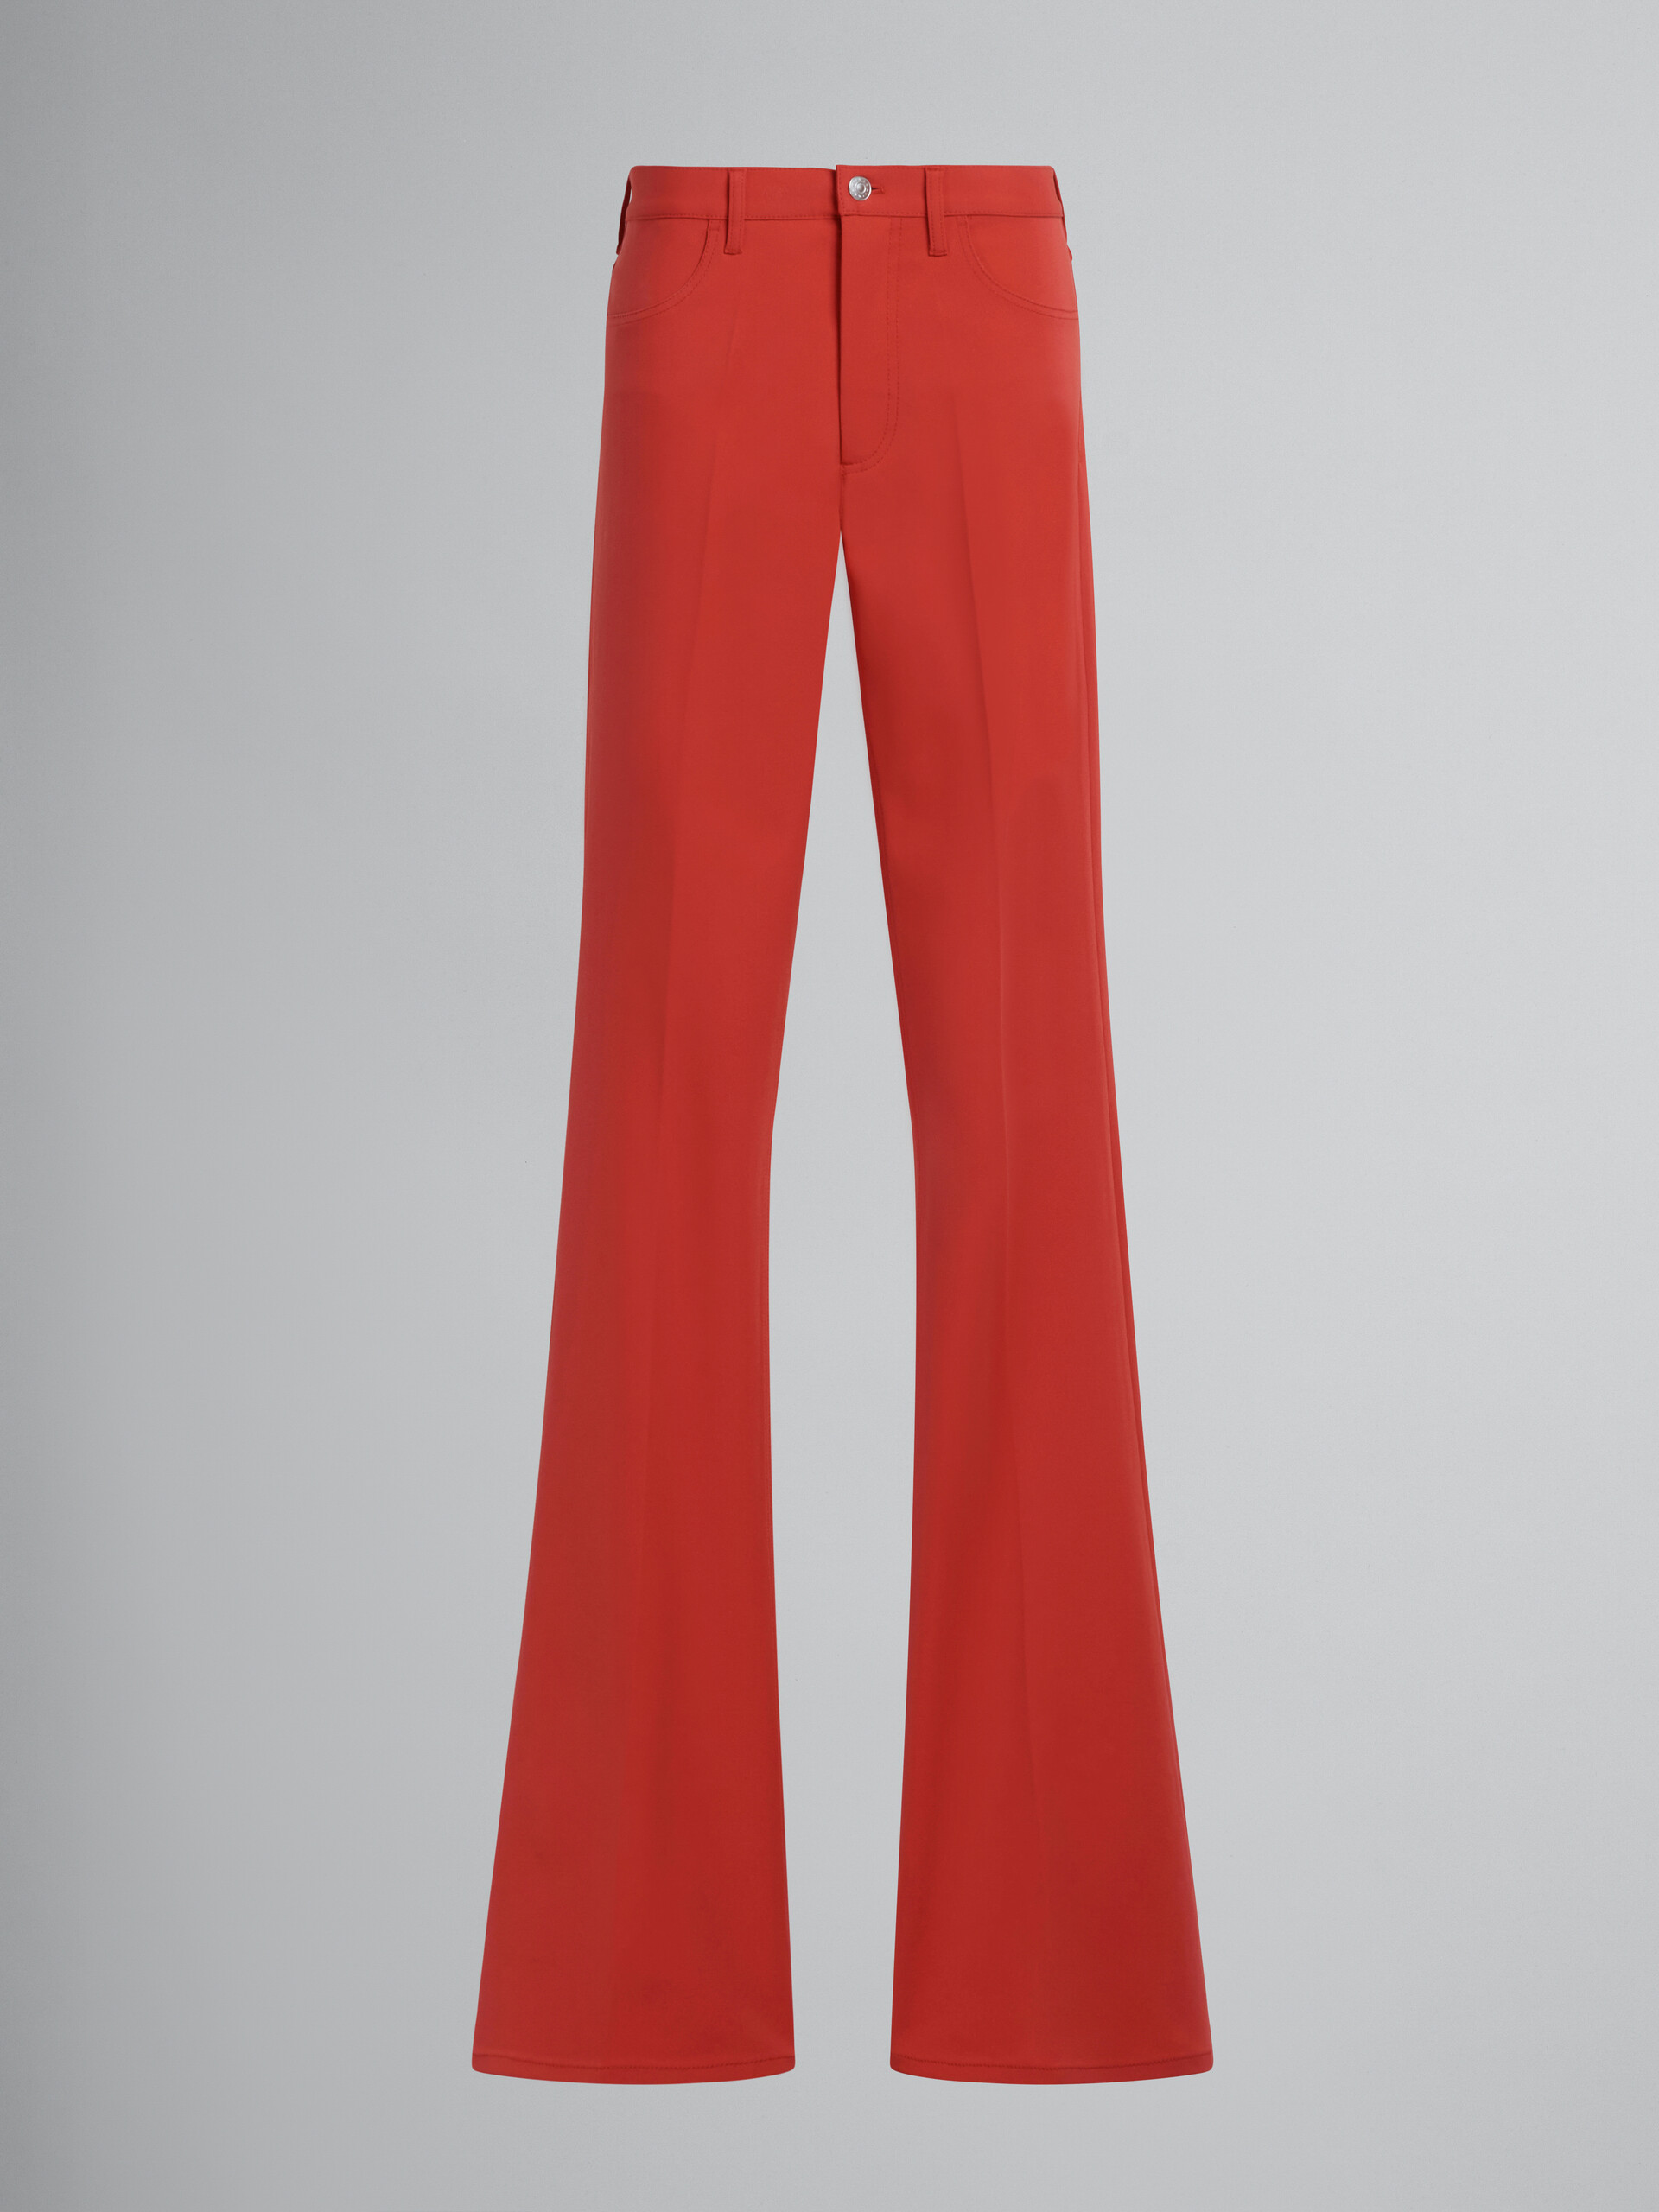 Red flared trousers in stretch jersey - Pants - Image 1